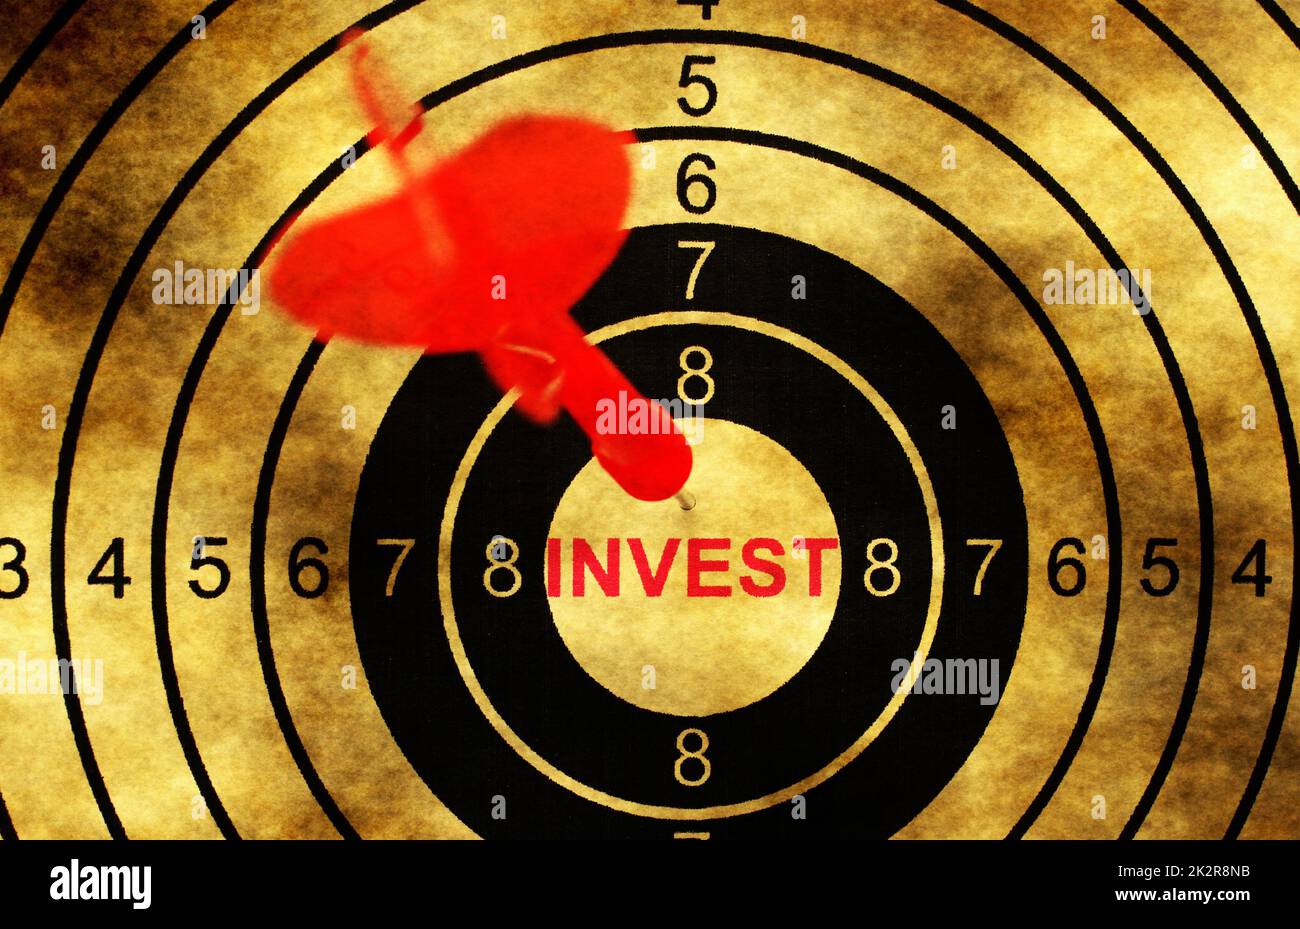 Invest target concept on grunge background Stock Photo